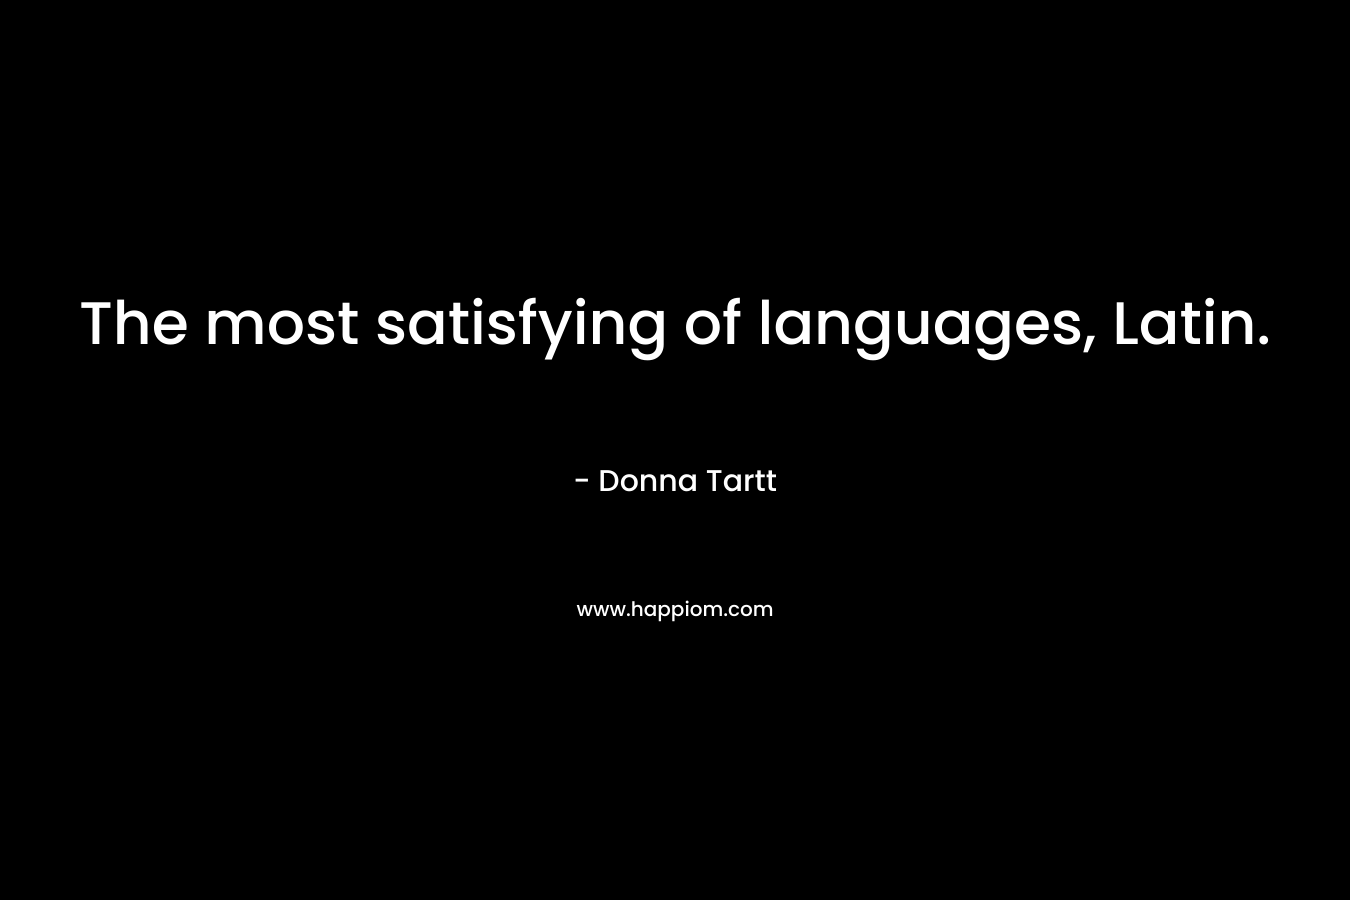 The most satisfying of languages, Latin. – Donna Tartt